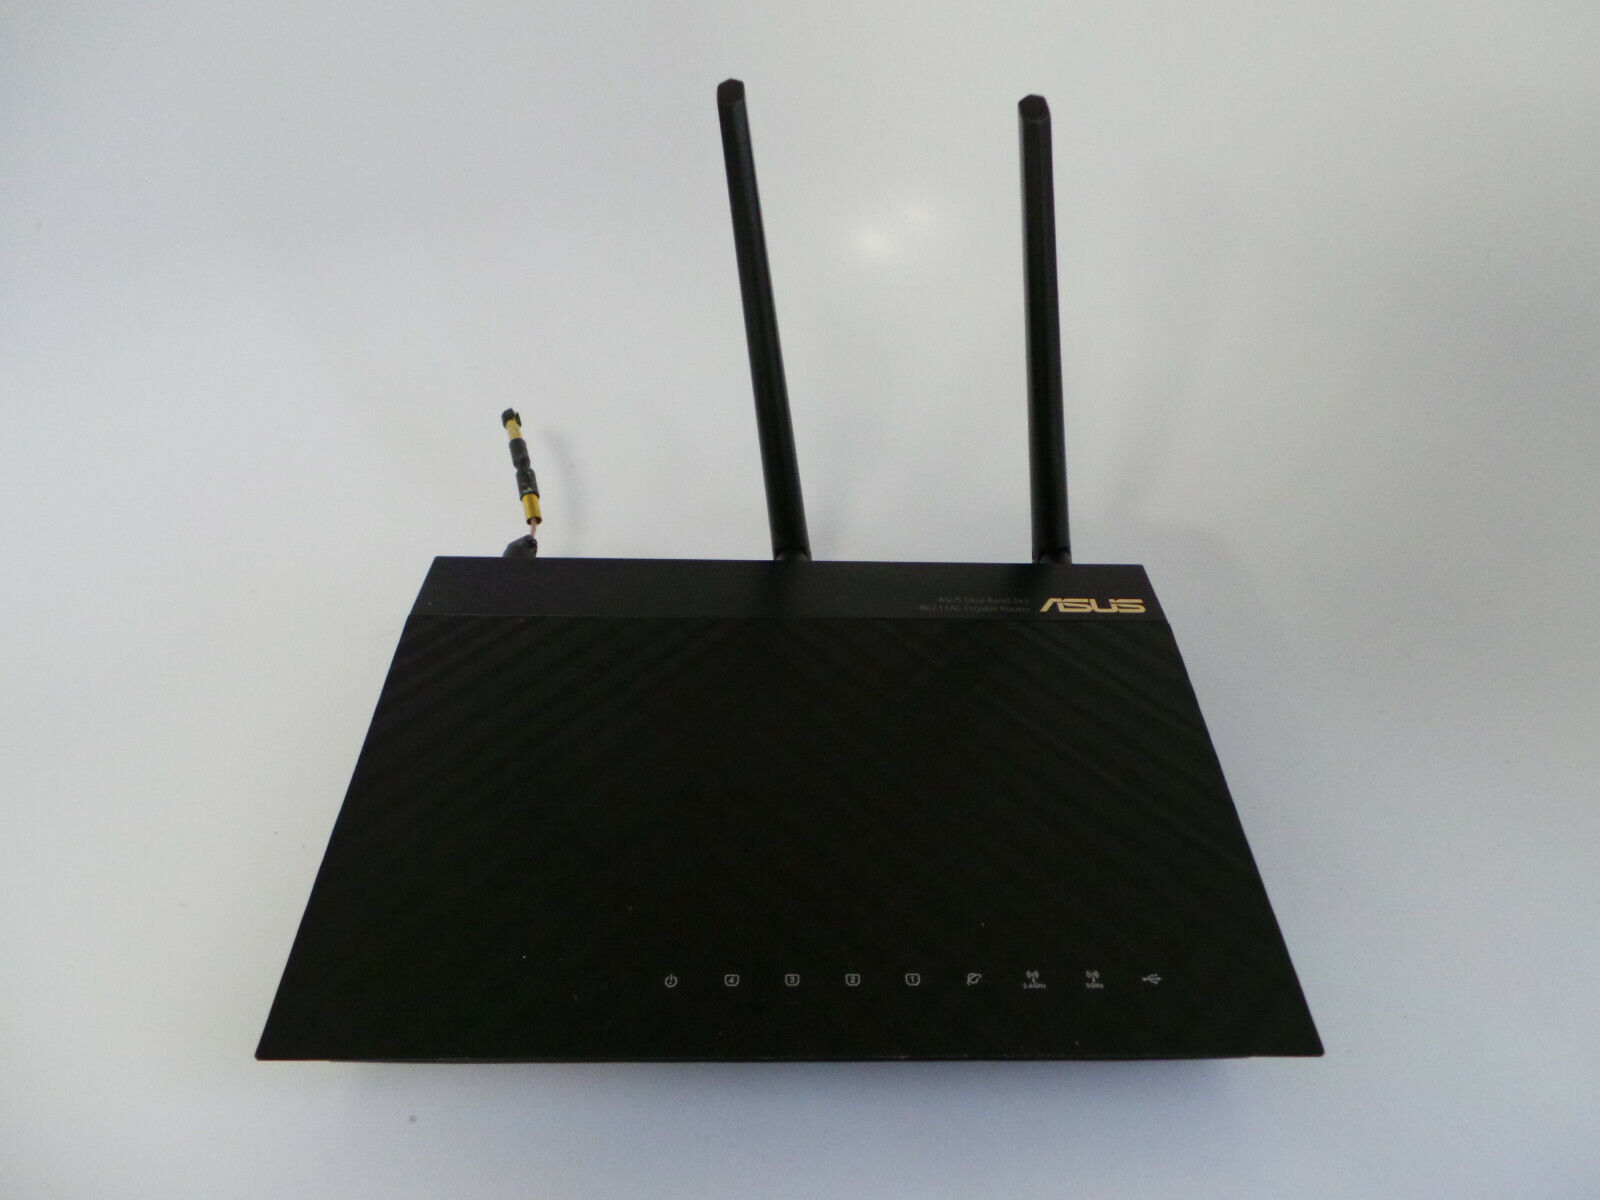 ASUS RT-AC66R 802.11ac Dual-Band Wireless-AC1750 Gigabit Router - READ